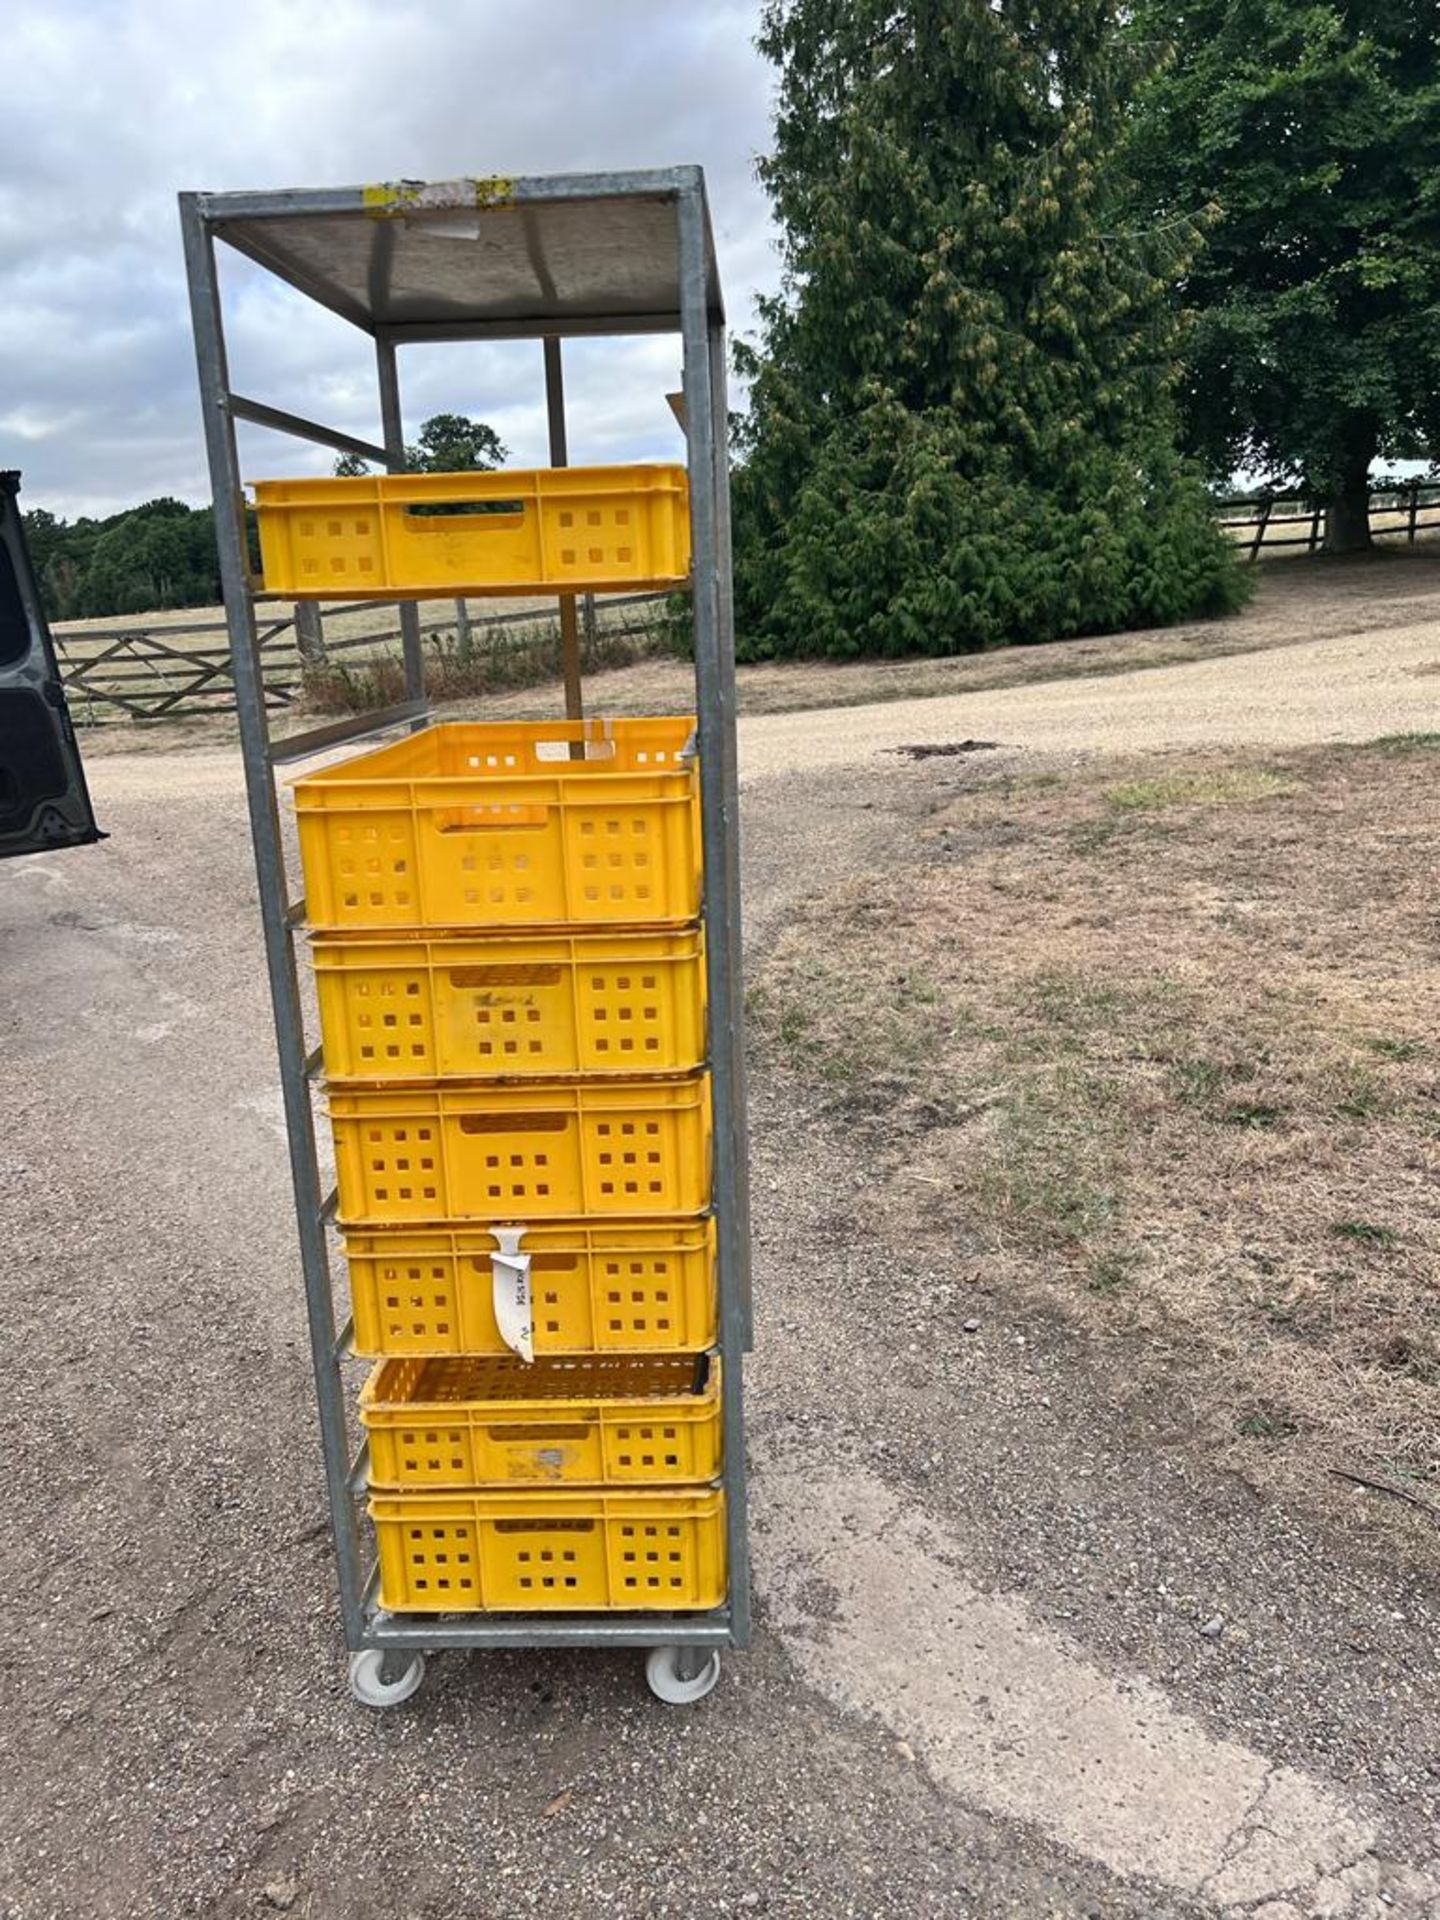 Wheeled 9-Slot Bread Tray Frame with Yellow Plastic Bakery Boxes - Please note this Lot is located